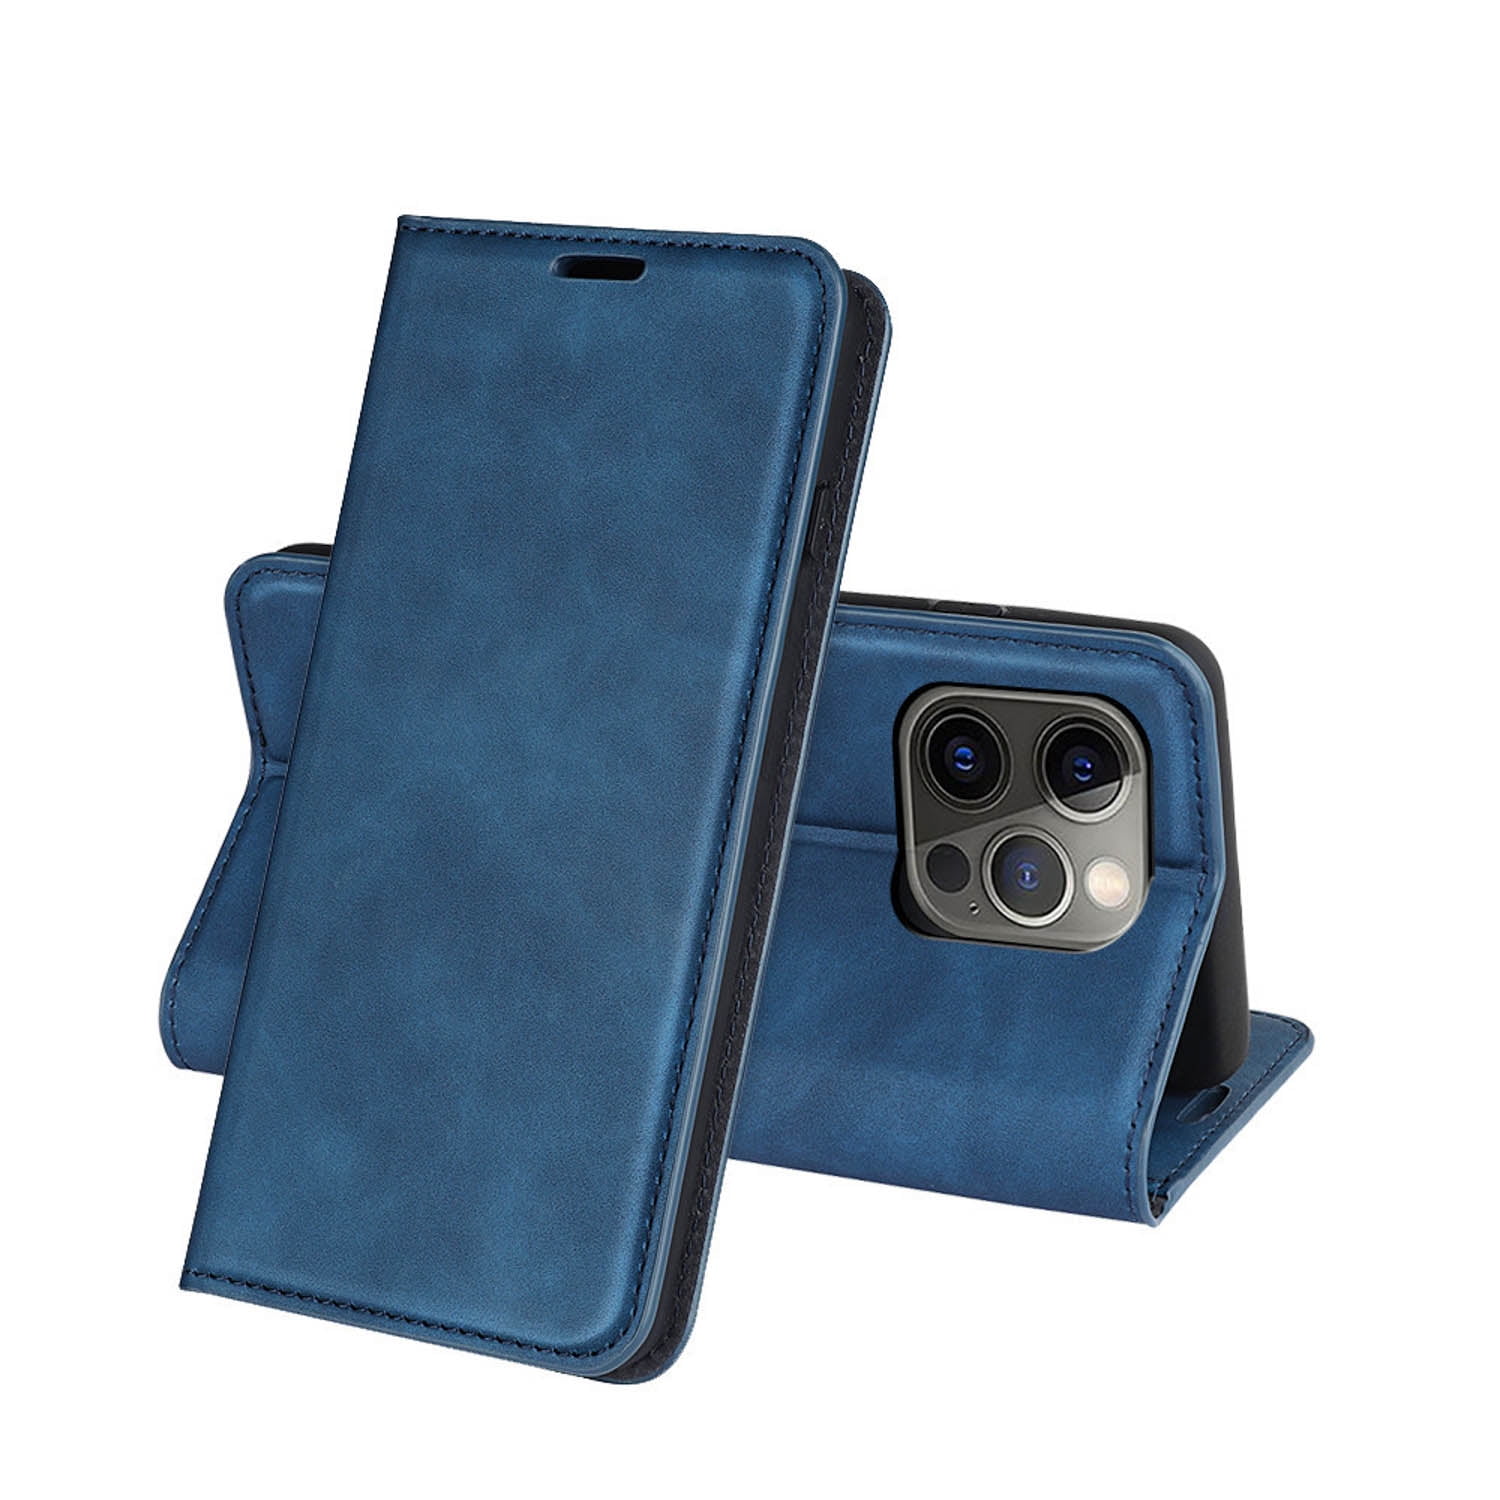 Cover for Leather Card Holders Wallet case Premium Business Kickstand Flip Cover iPhone Xs Flip Case